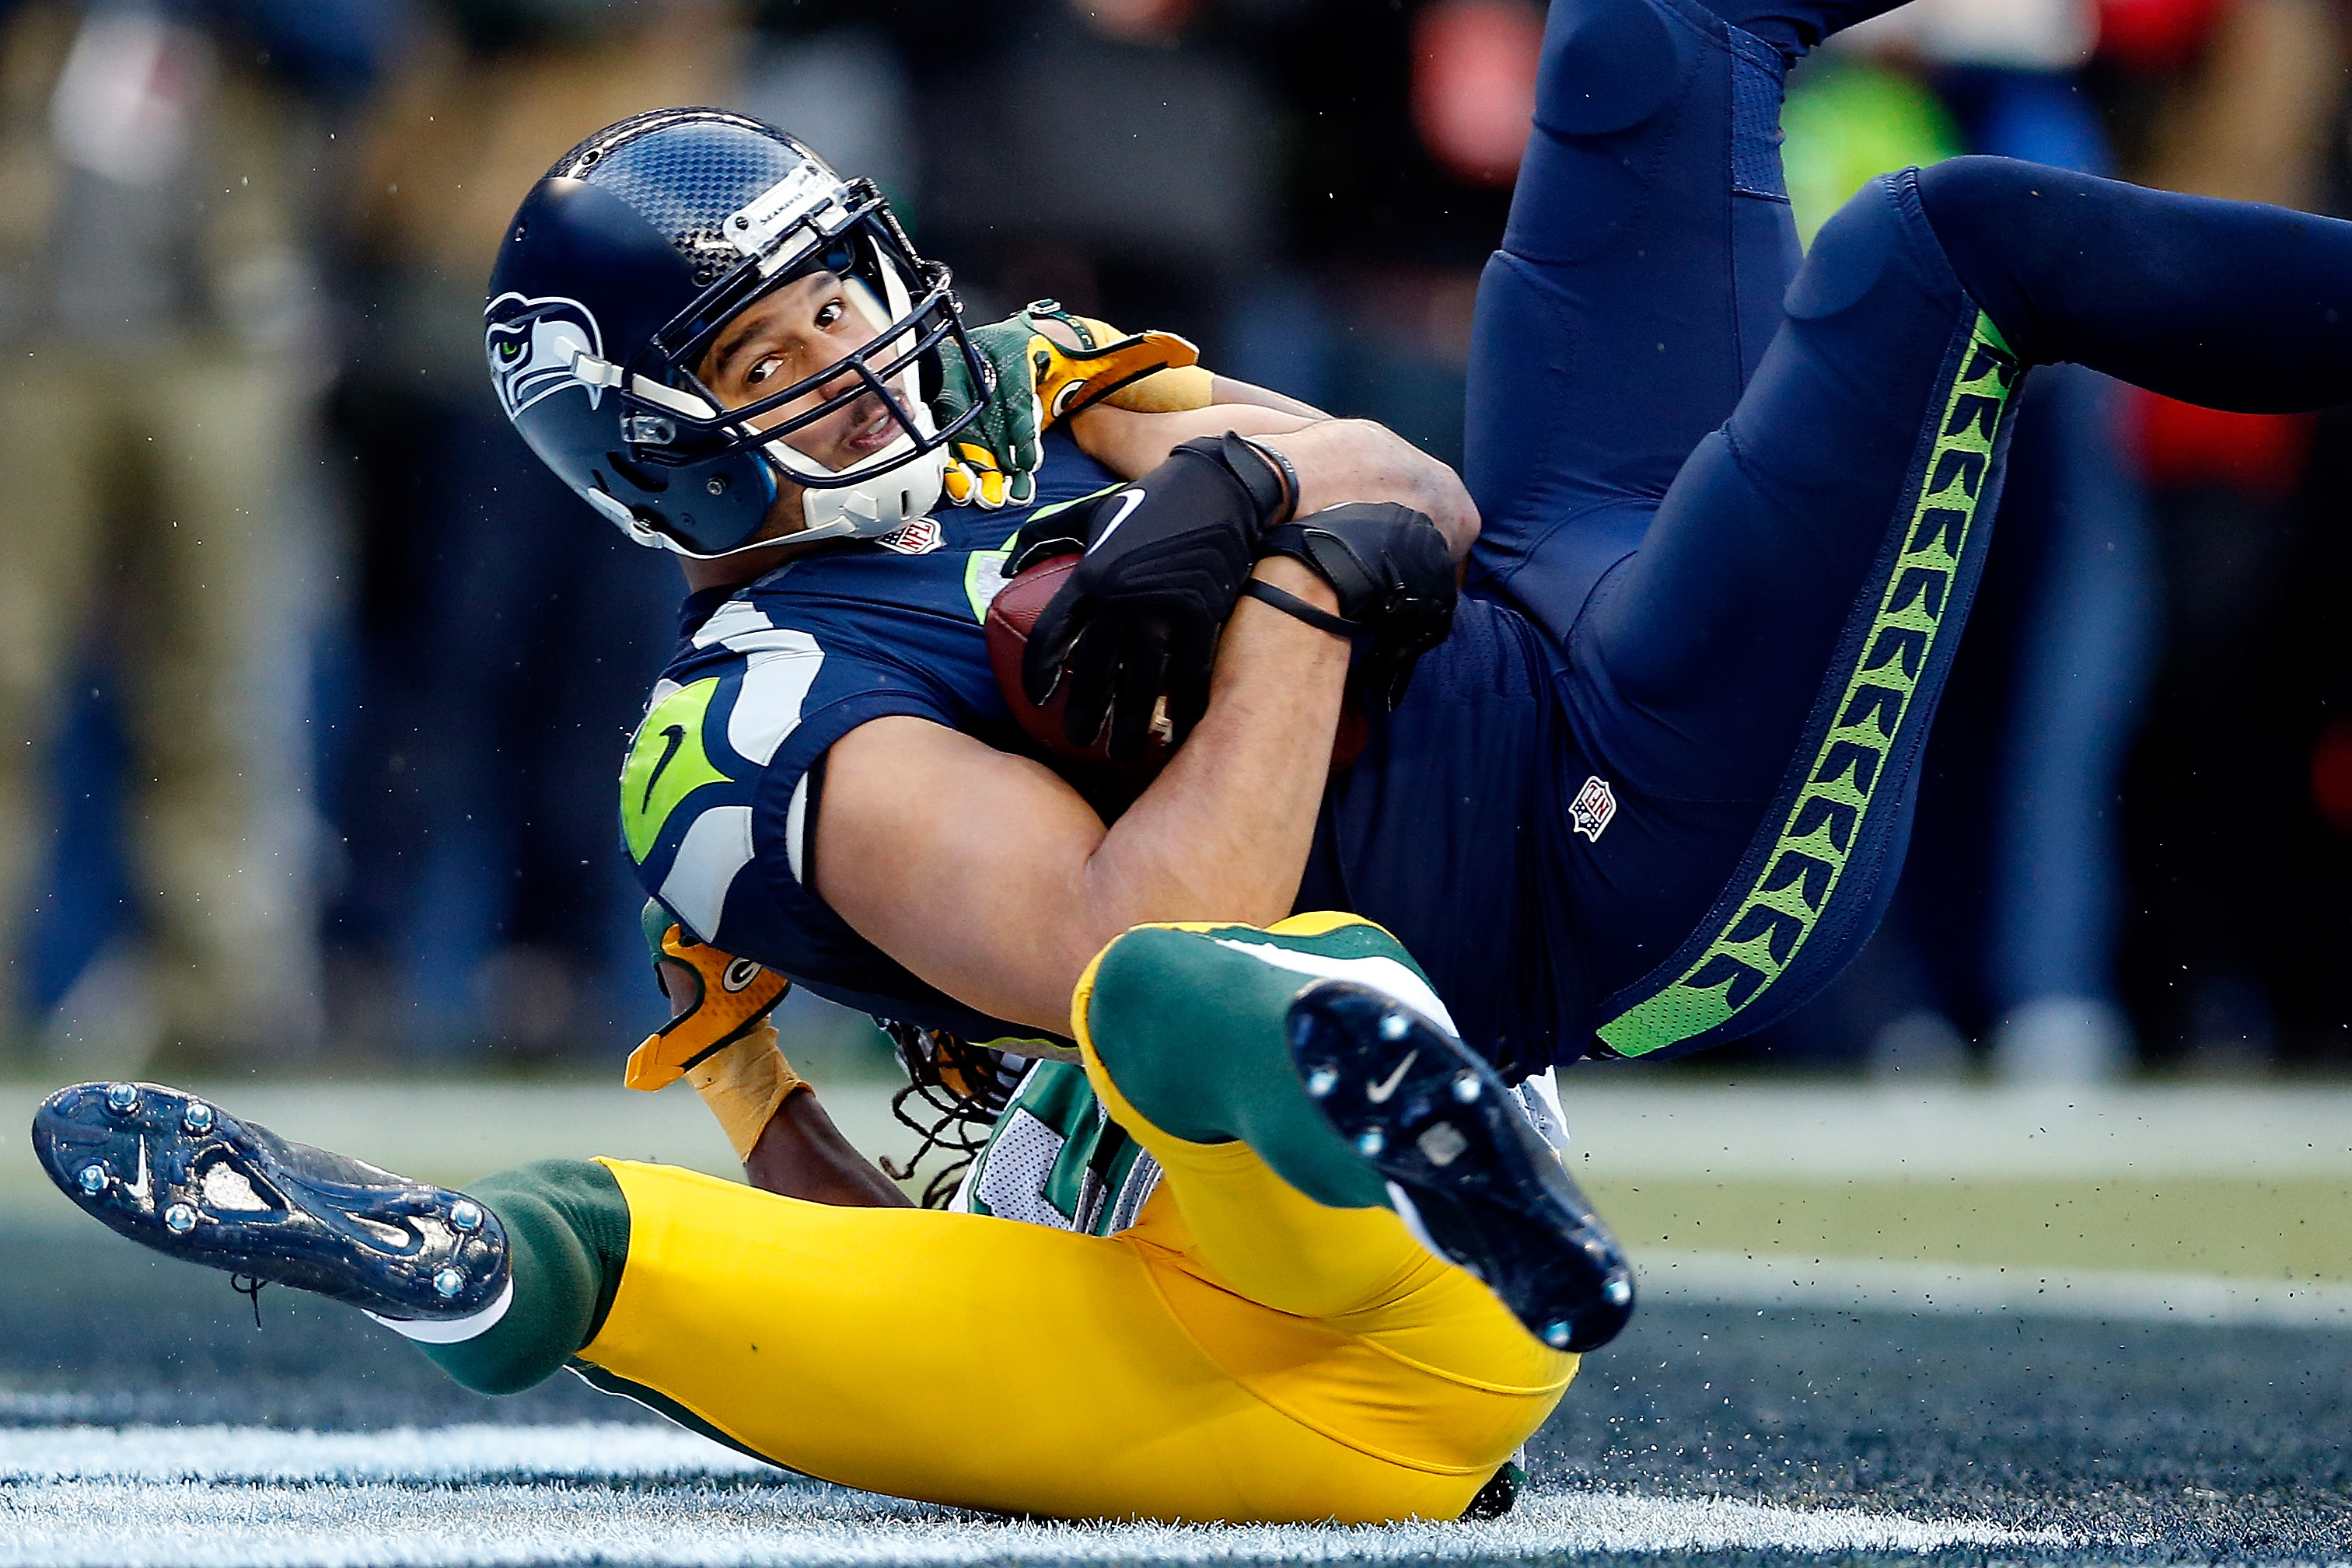 Seahawks rally stuns Packers 28-22 in OT for NFC title